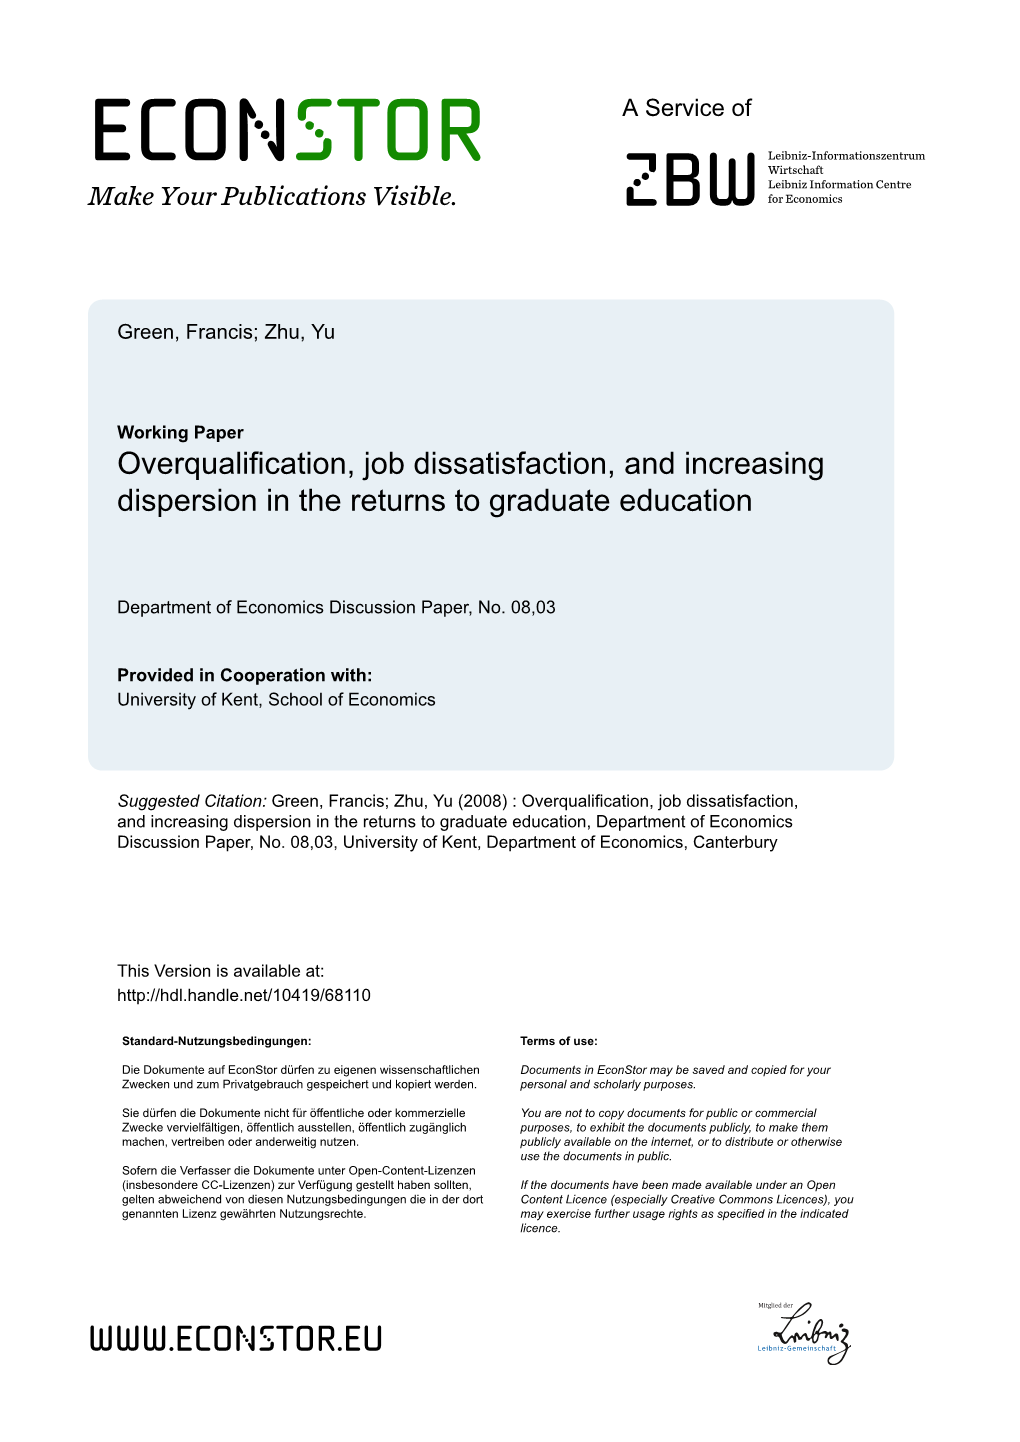 Overqualification, Job Dissatisfaction, and Increasing Dispersion in the Returns to Graduate Education